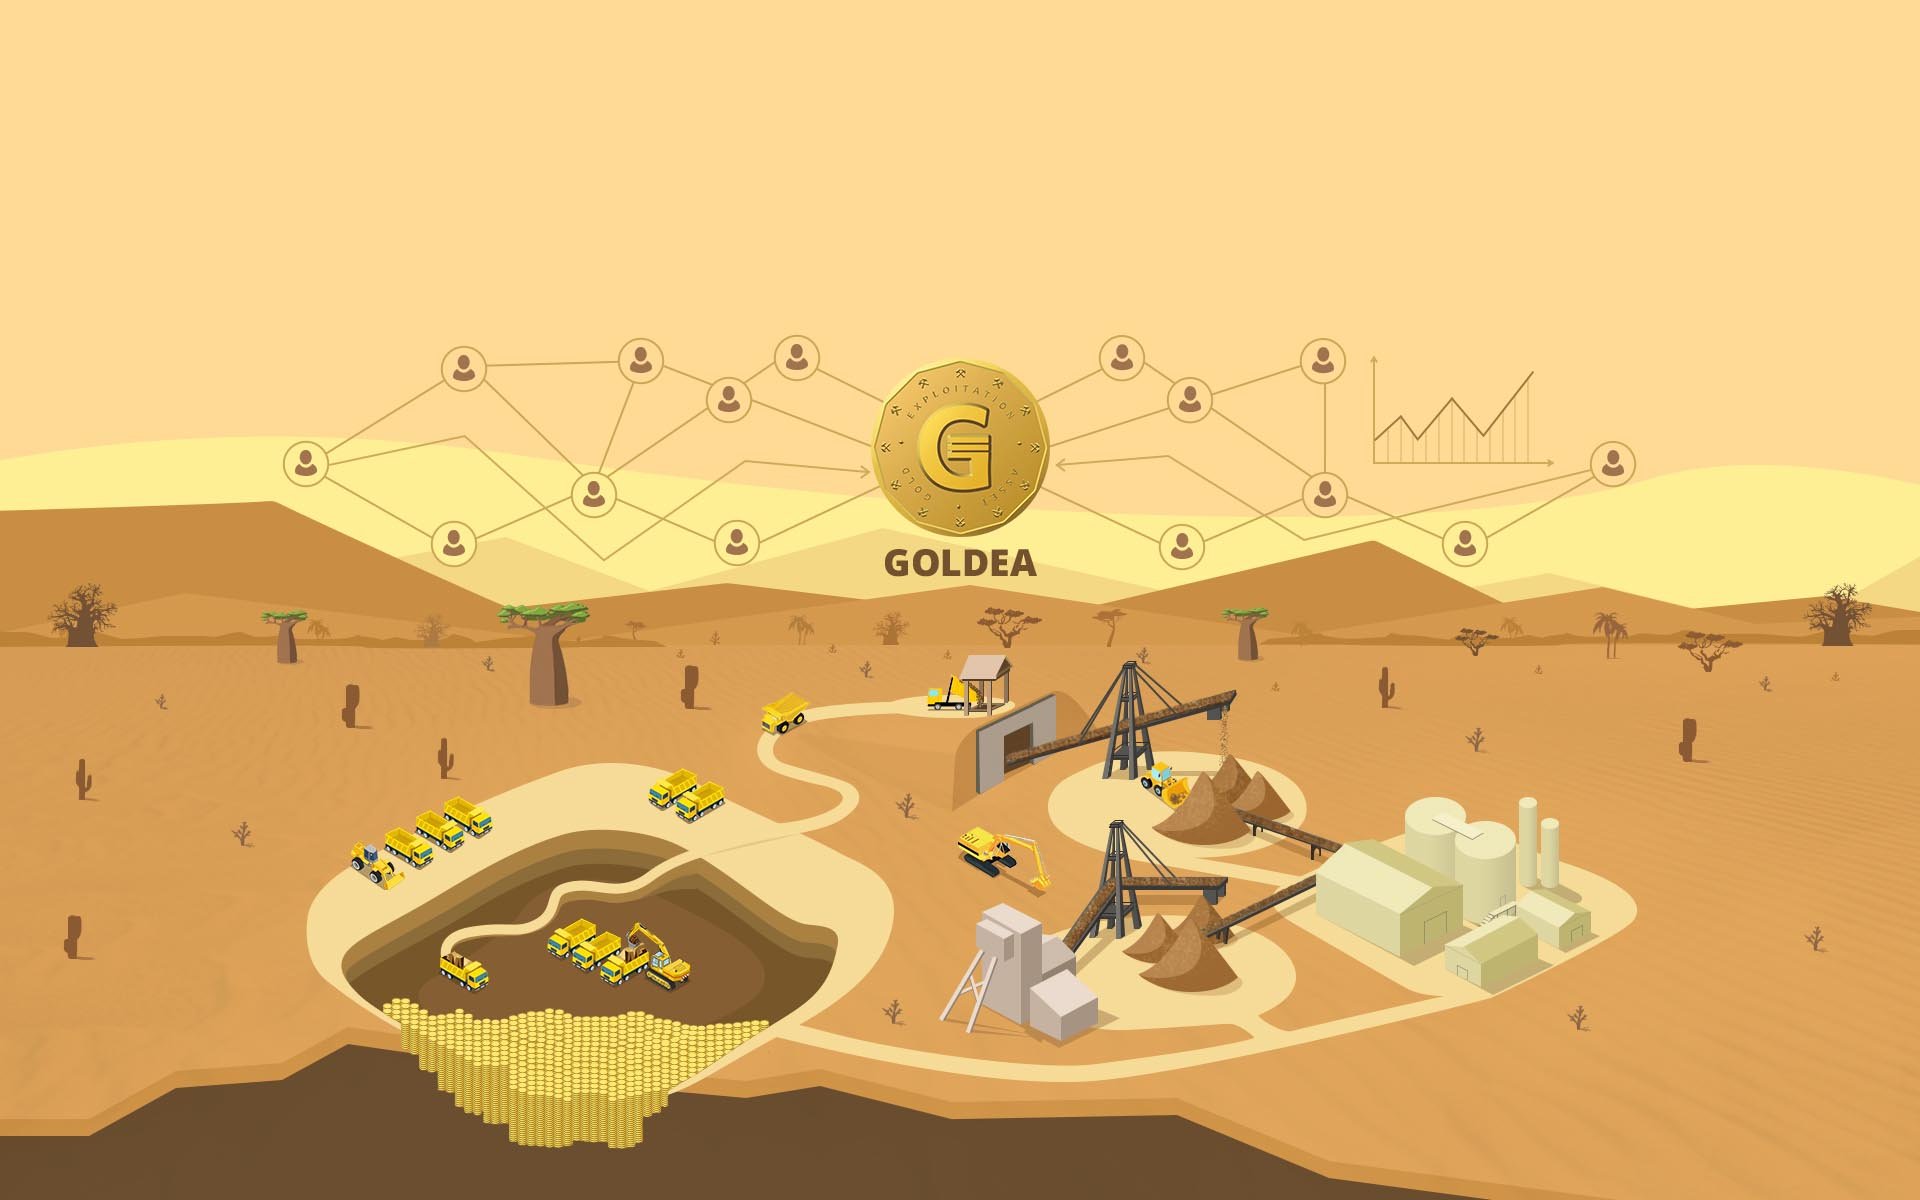 GOLDEA Launches the First Phased ICO on a Progress Basis From the Real Sector